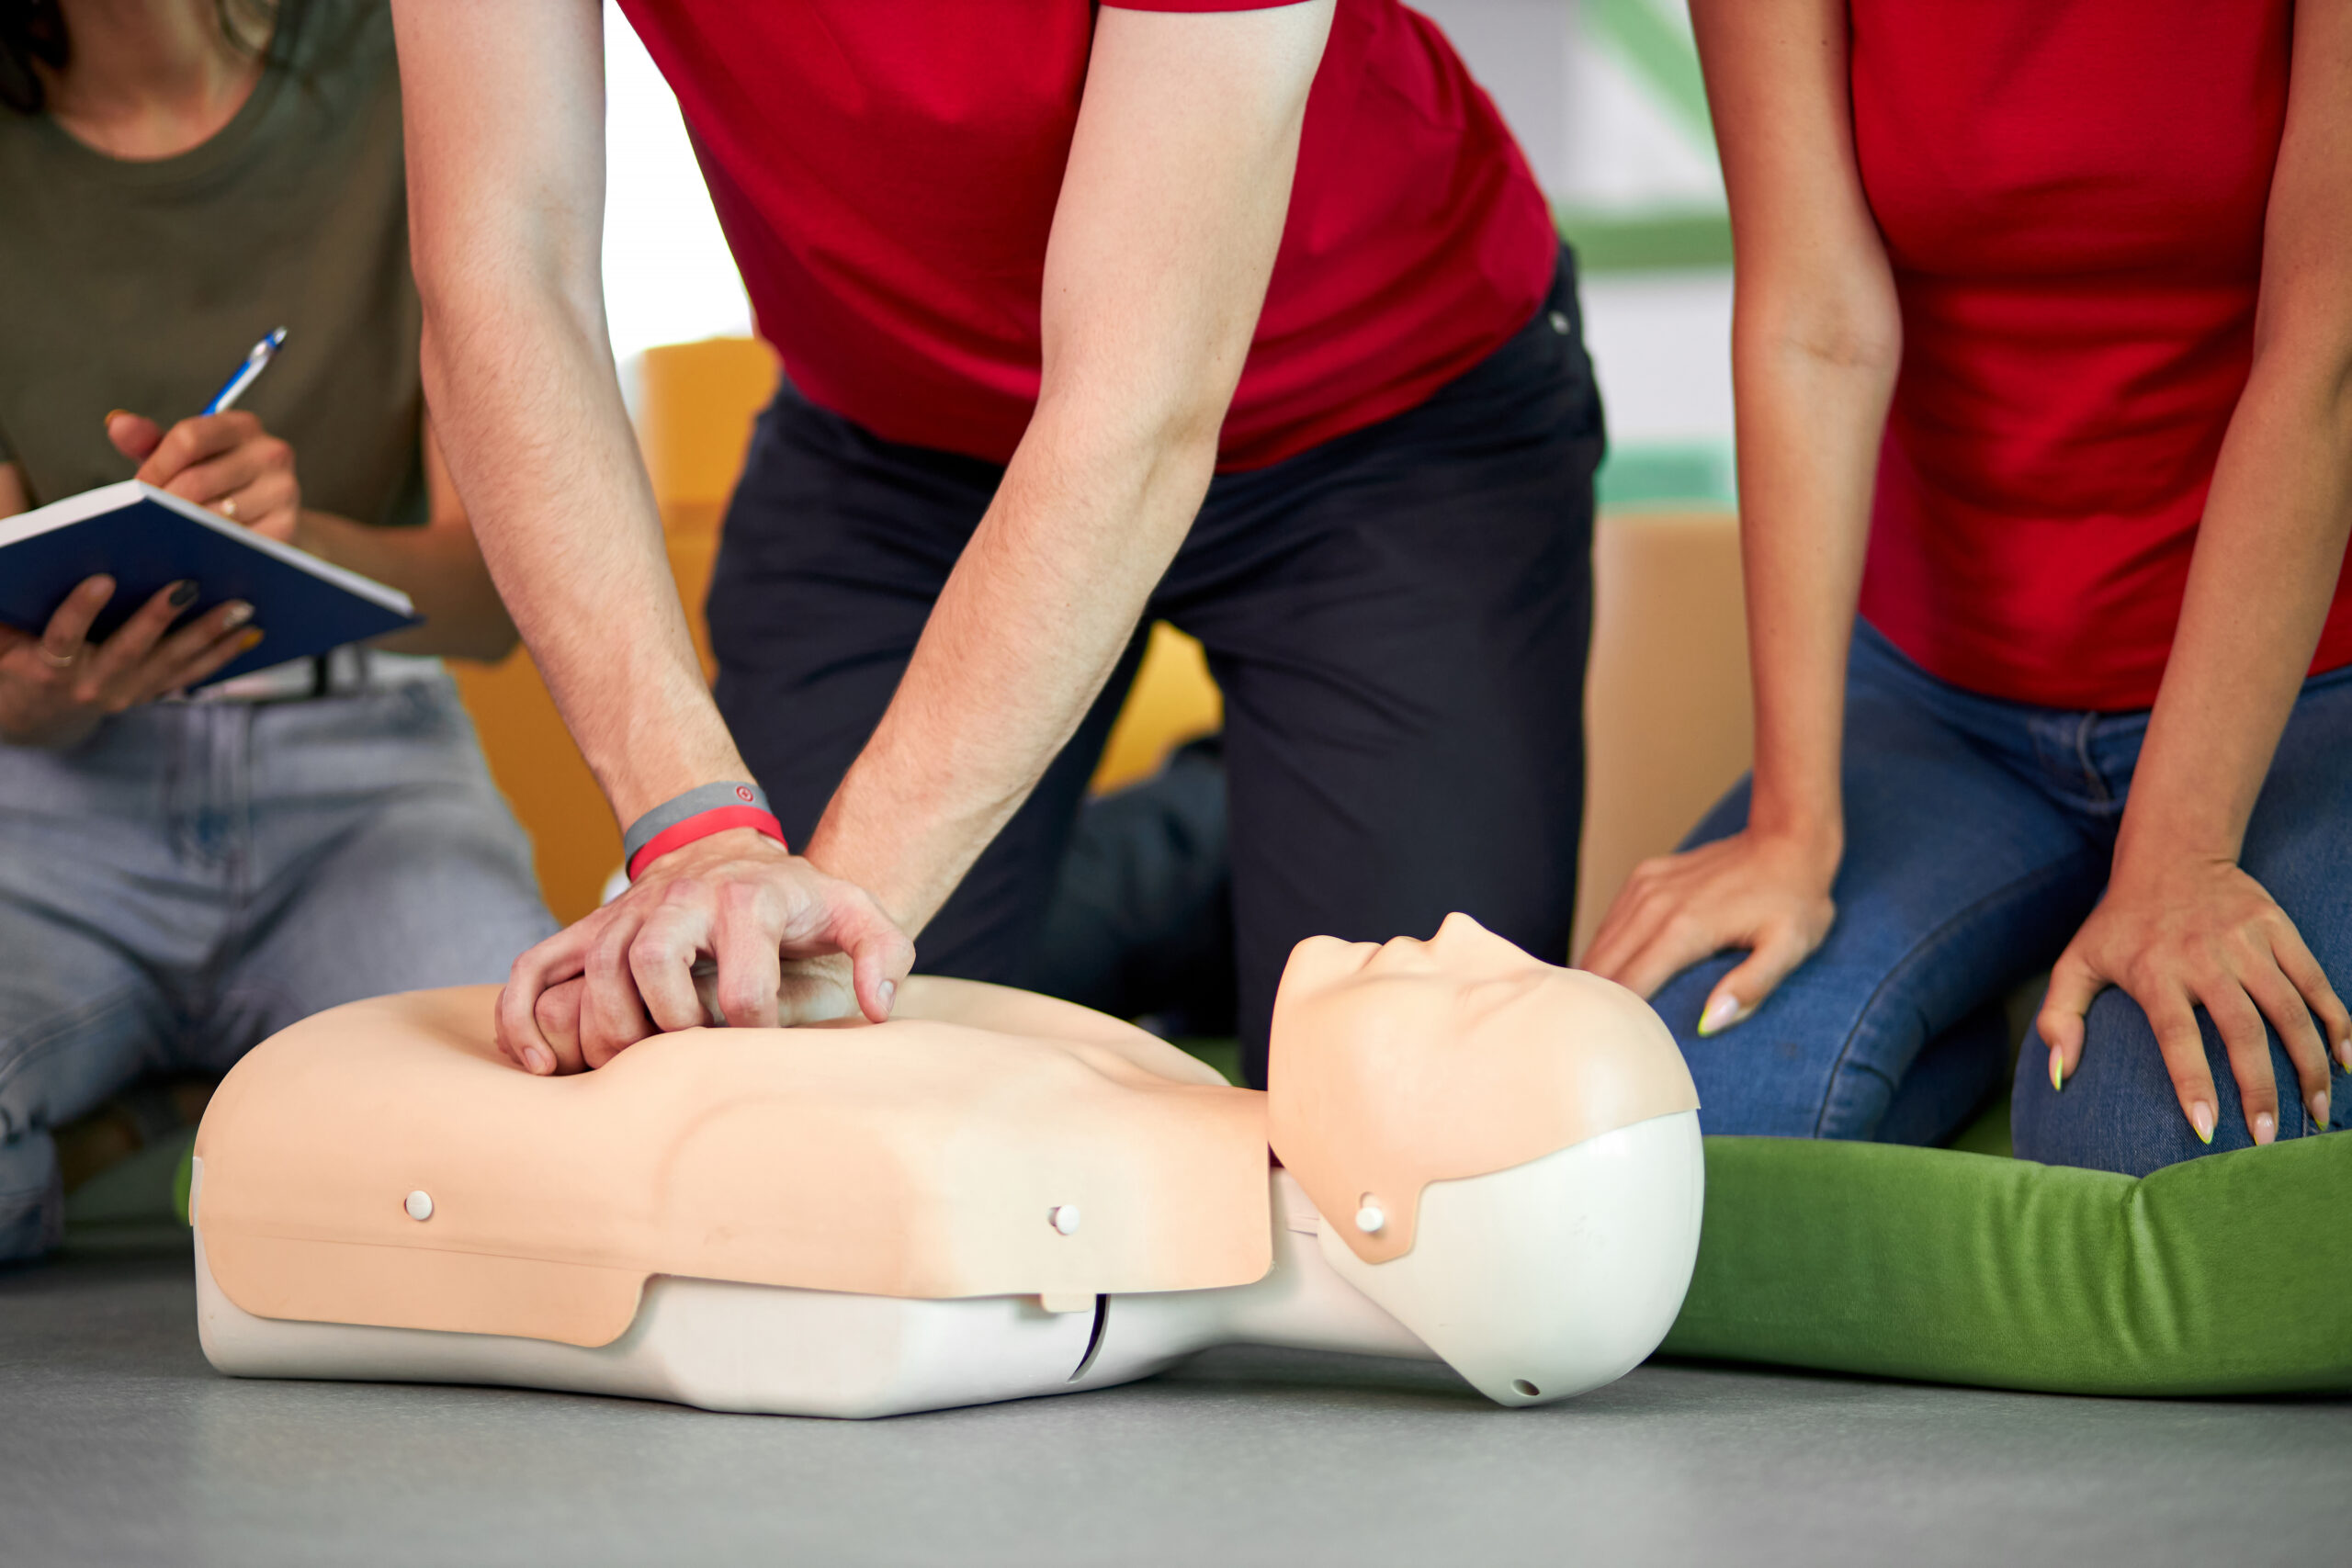 young male practicing CPR on a mannequin in the presence of people